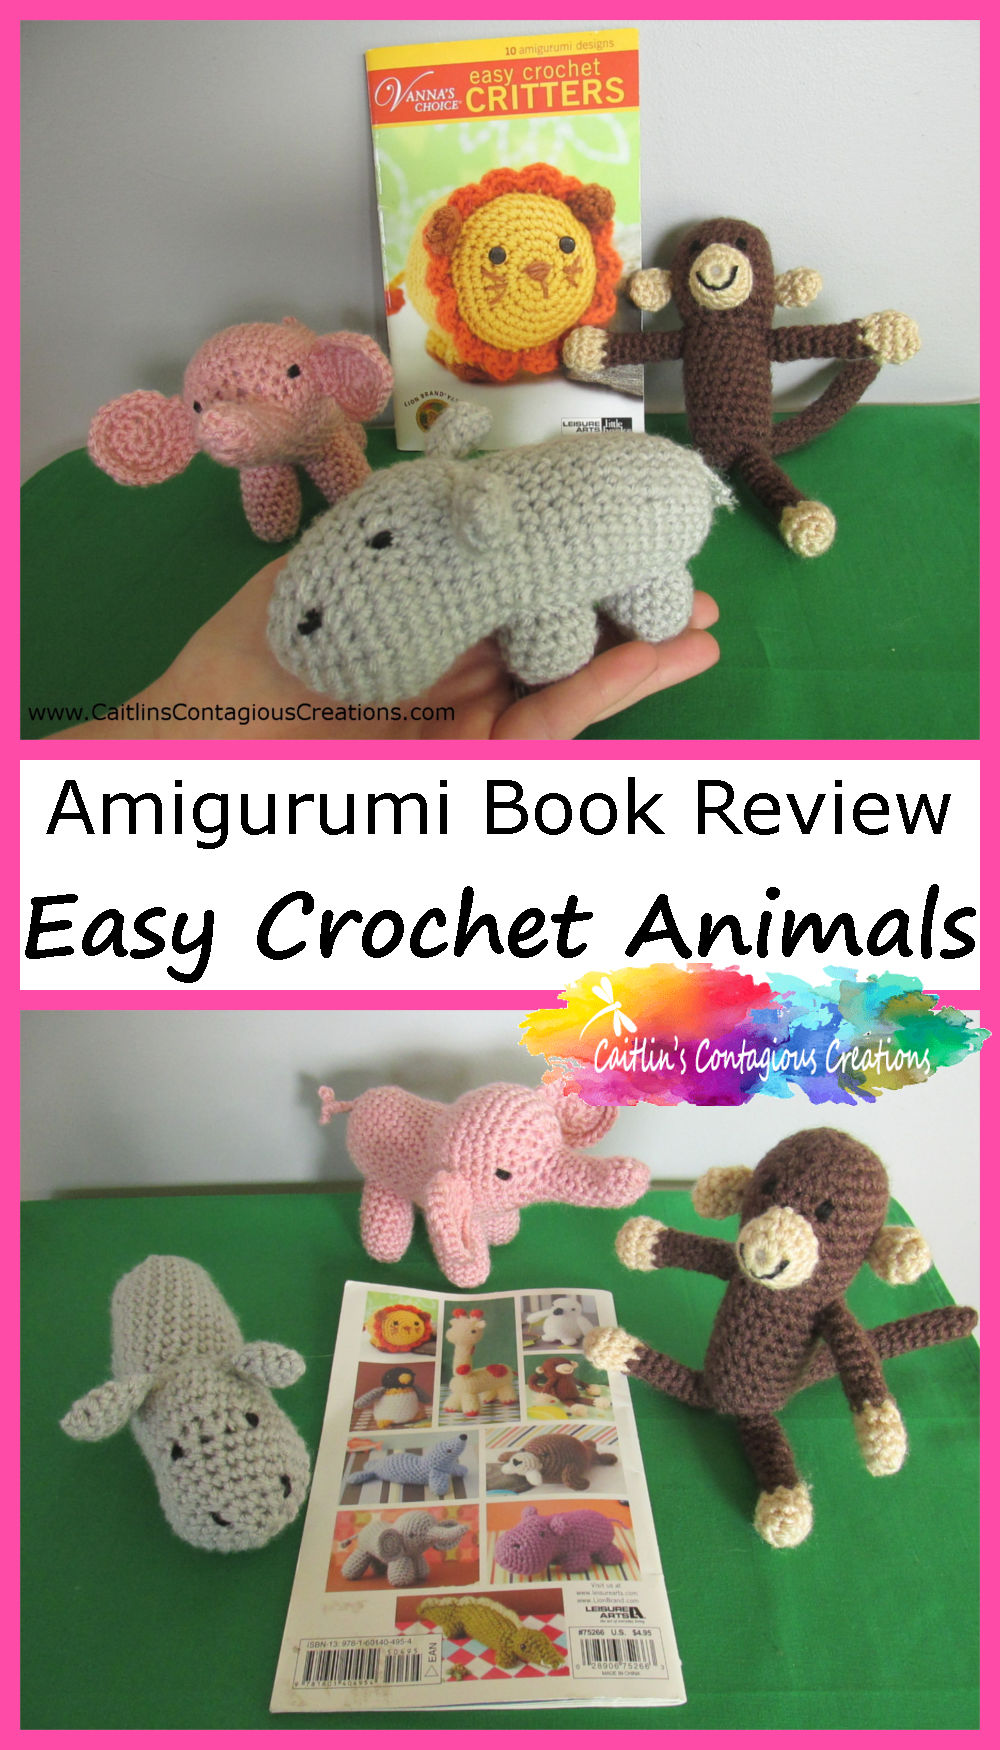 Amigurumi book review of Easy Crochet Critters. Front and back covers with stuffed animals